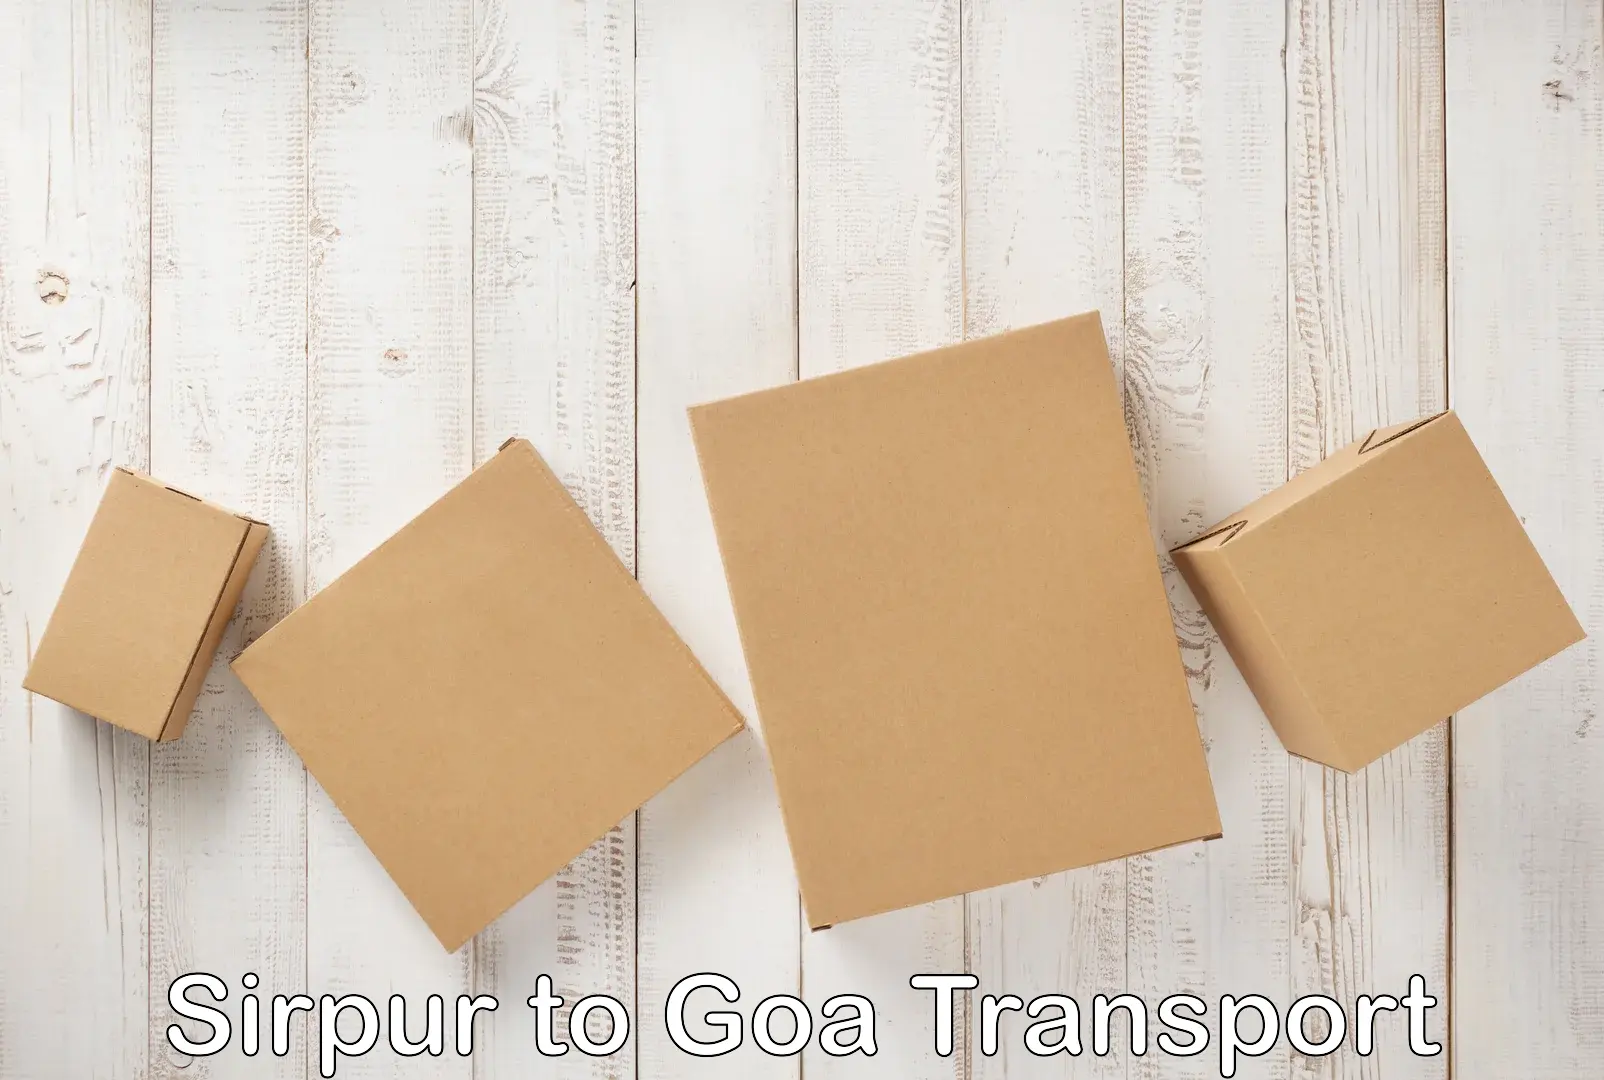 Container transport service in Sirpur to Goa University